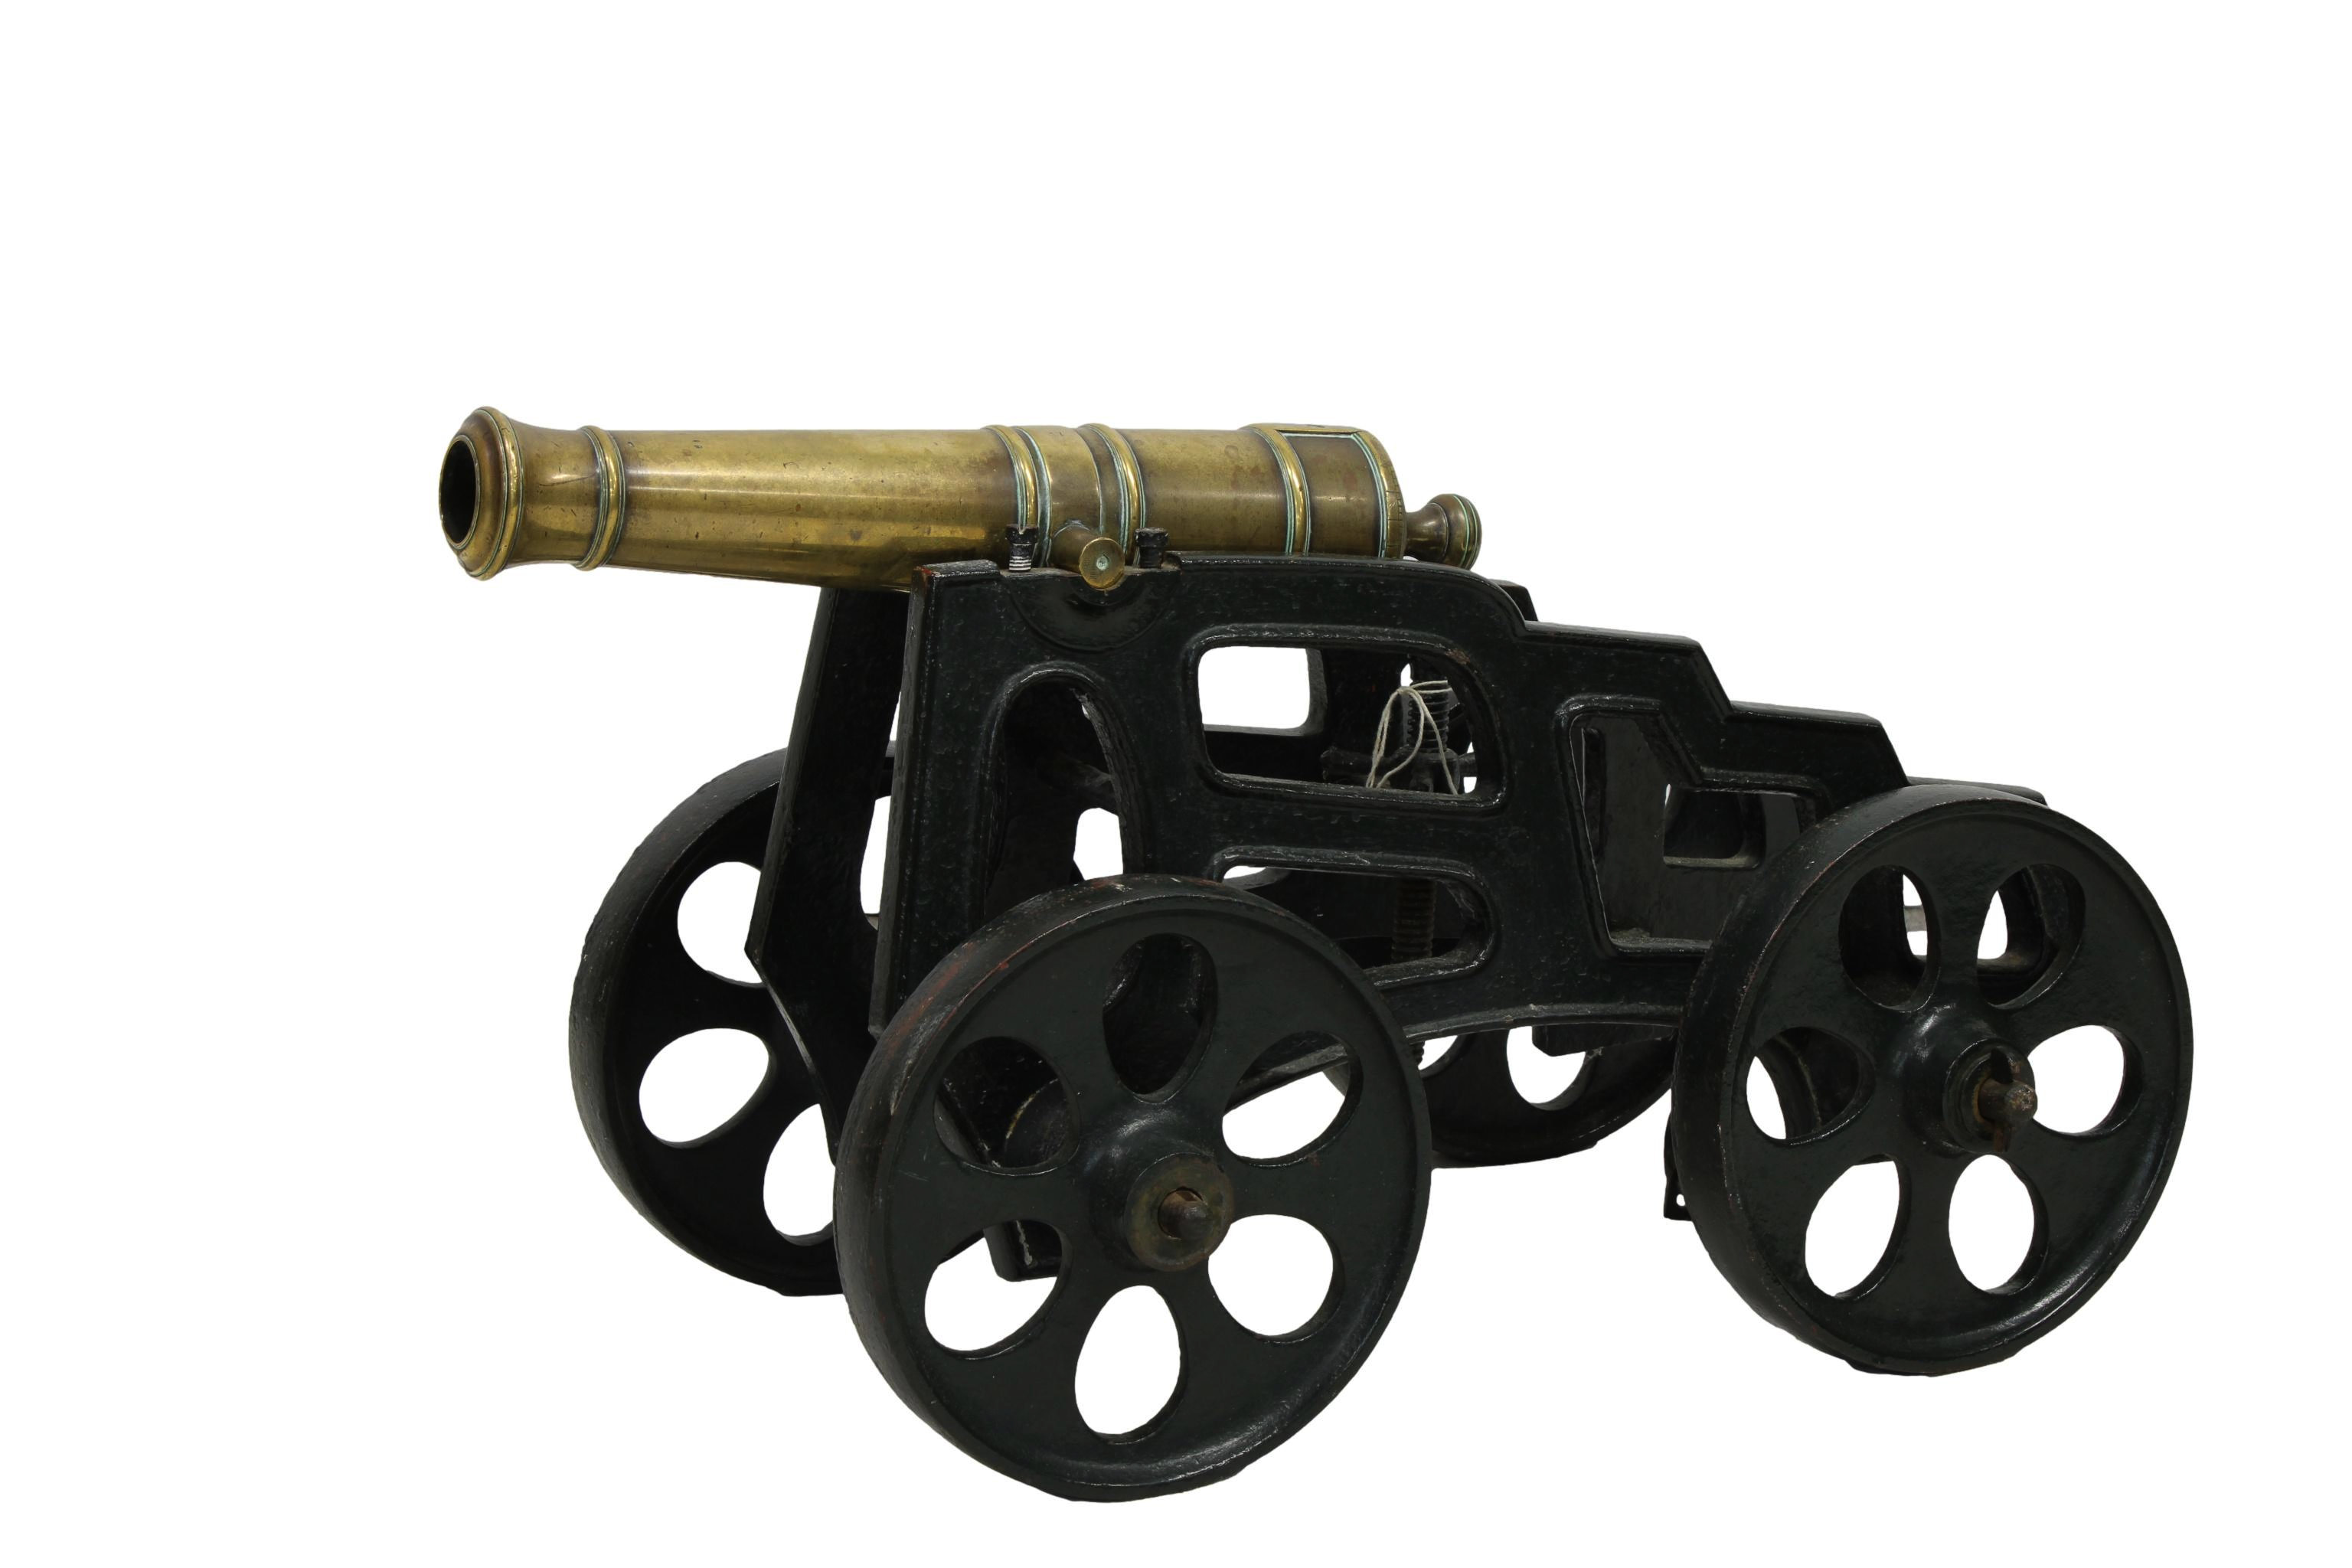 A model cannon with a polished brass barrel and iron four wheeled gun carriage